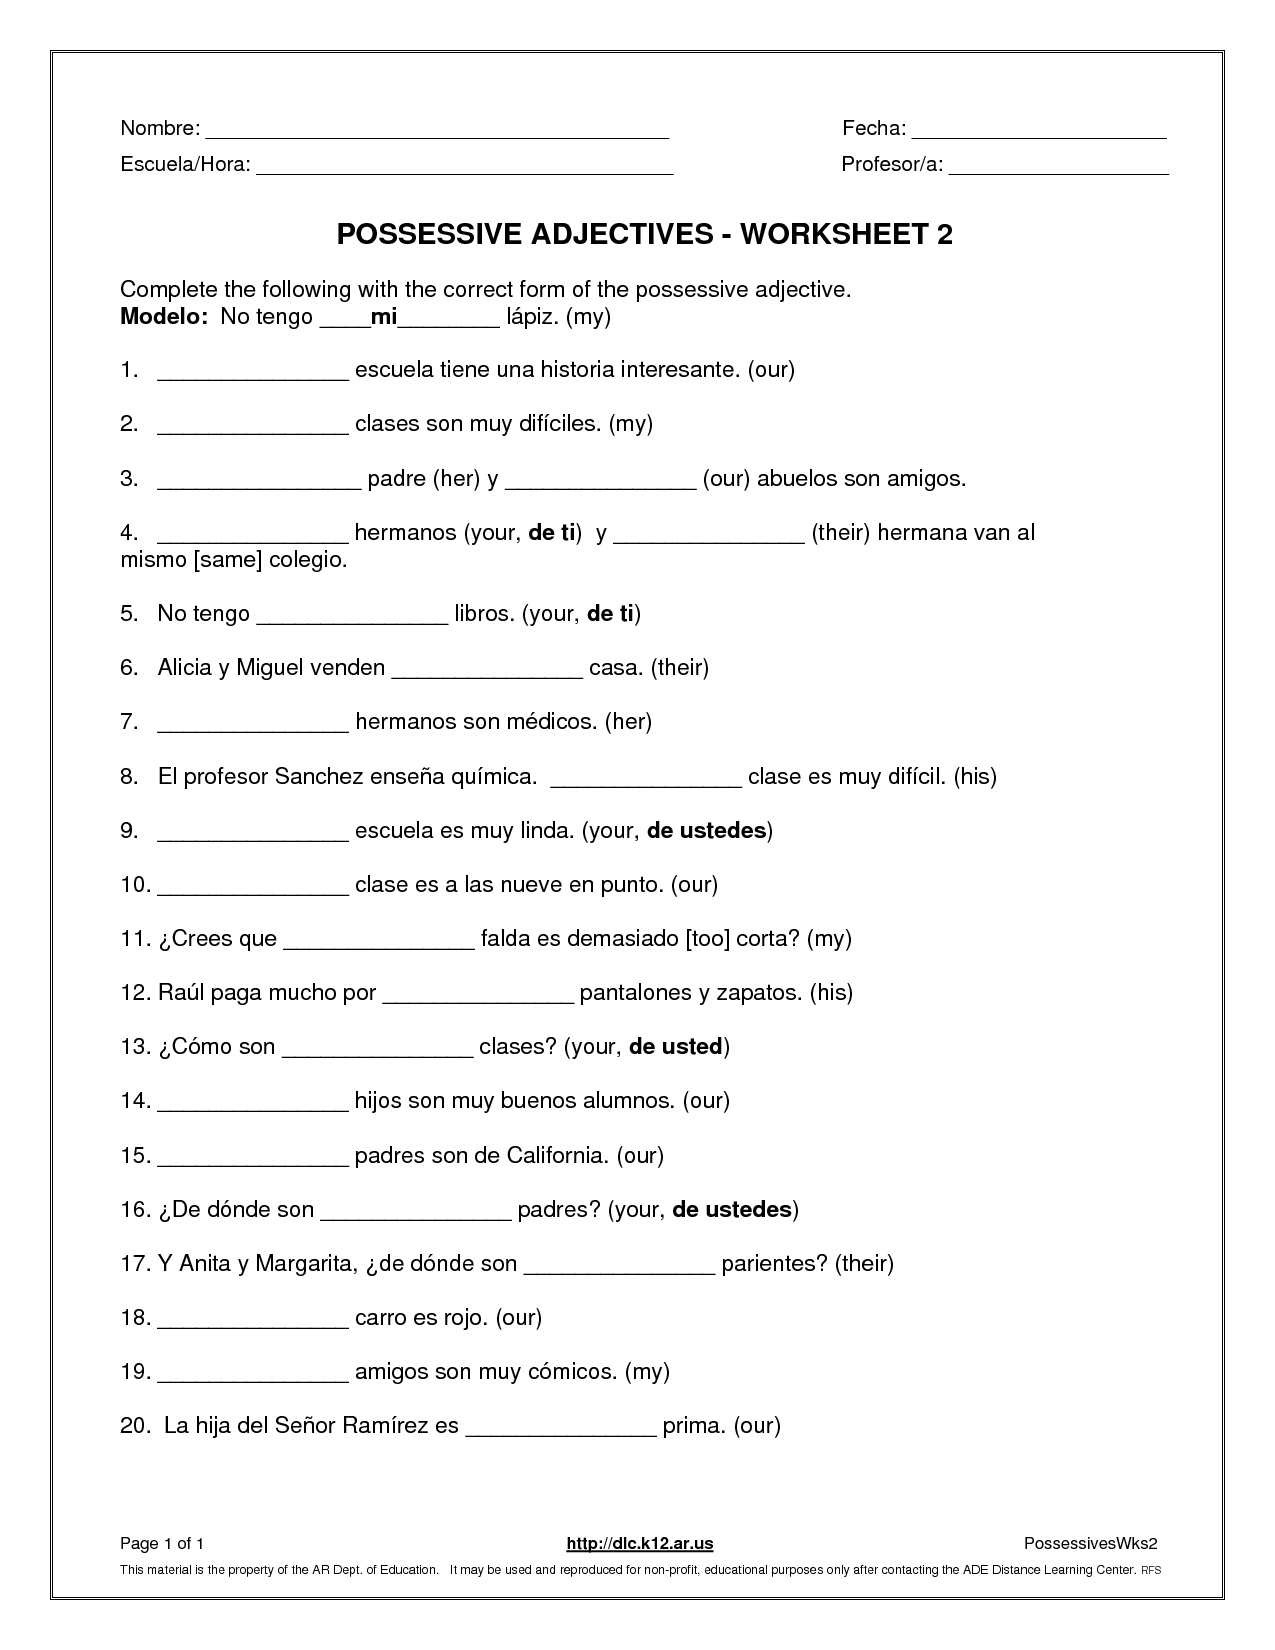 Agreement Of Adjectives Spanish Worksheet Answers 108625 Db excel